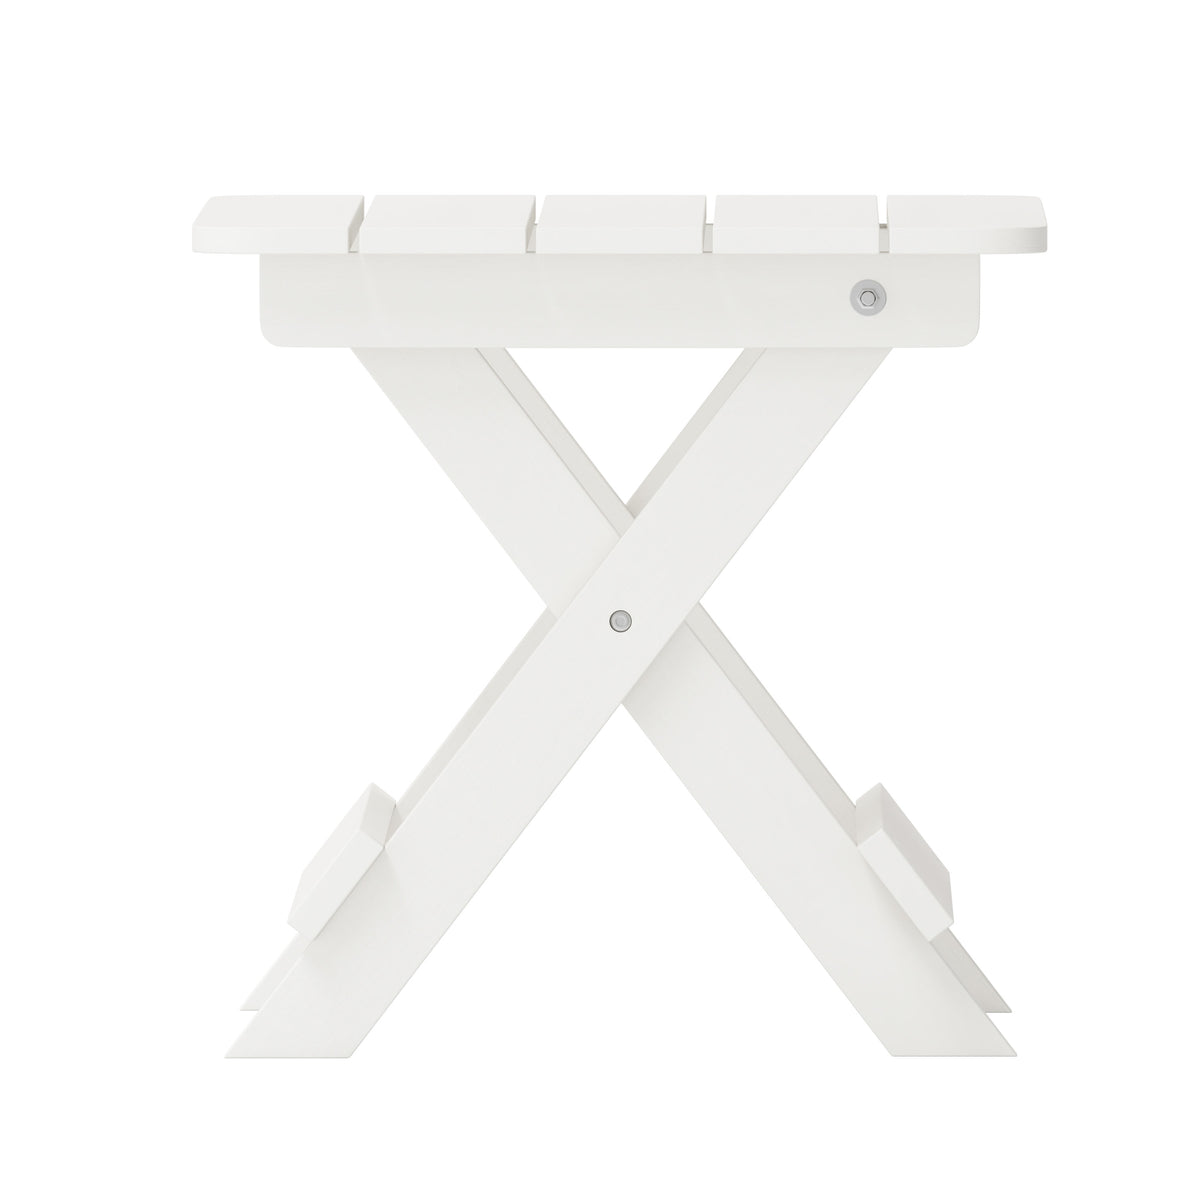 White |#| Commercial Grade All-Weather Portable Folding Adirondack Side Table - White